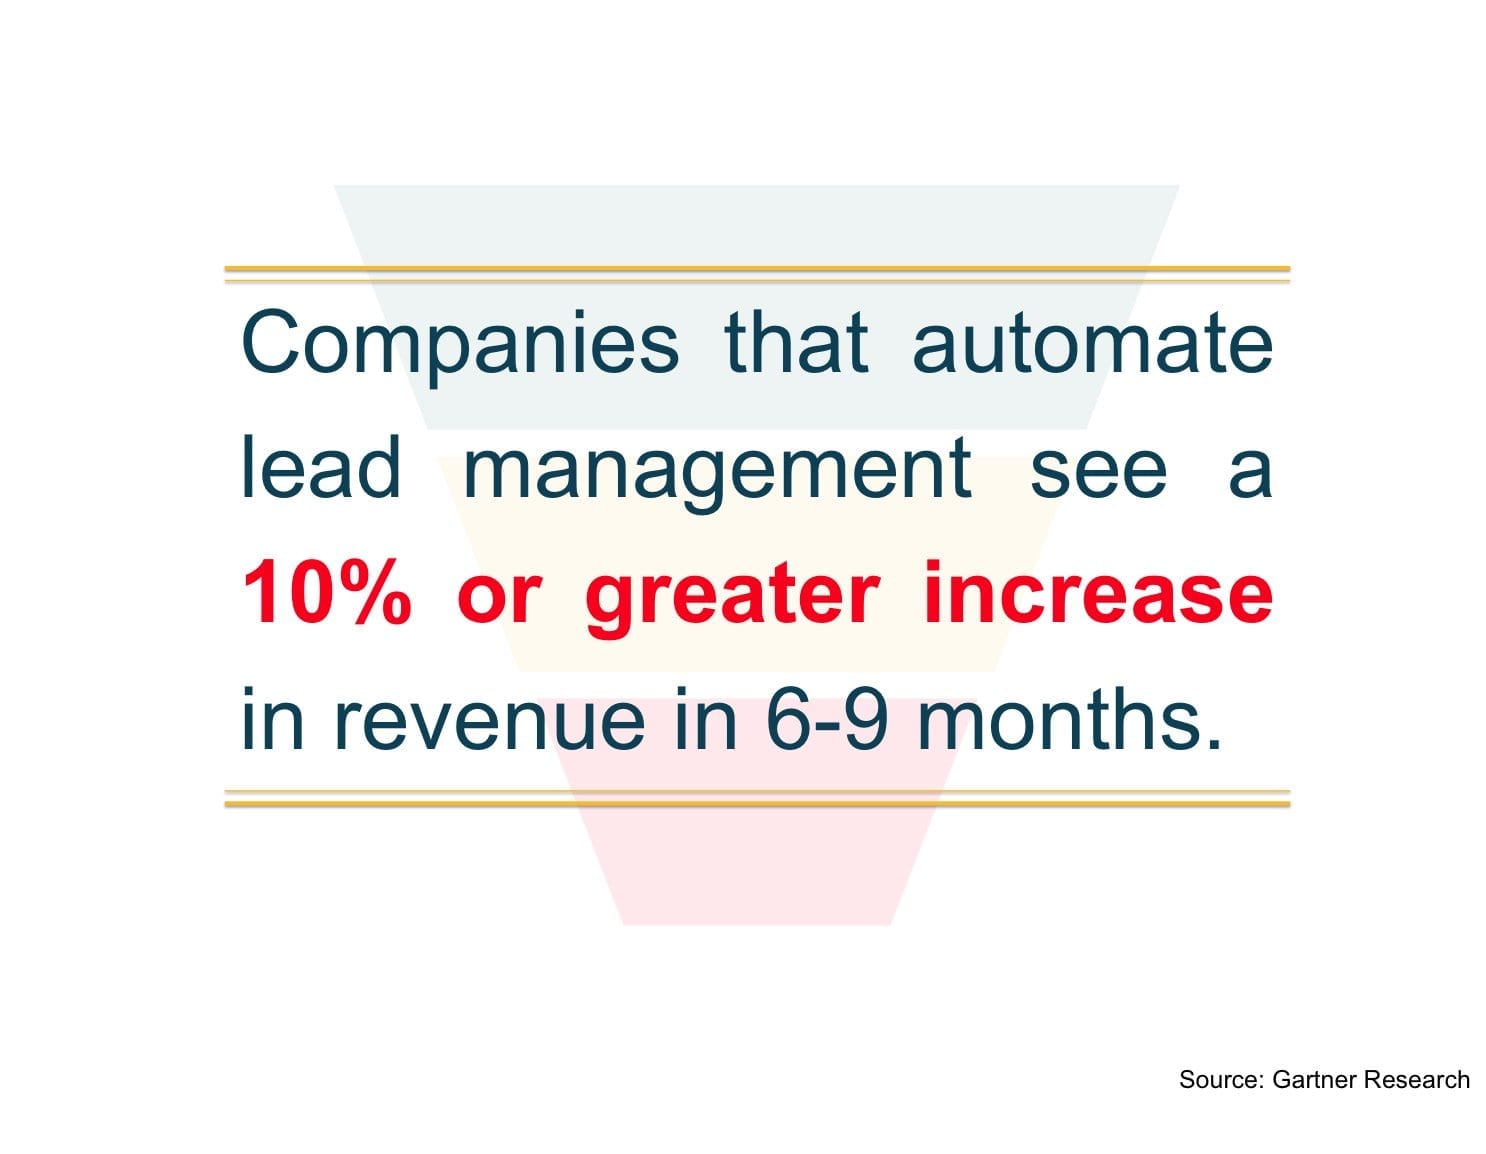 companies_that_use_automation_increase_revenue_by_10_percent